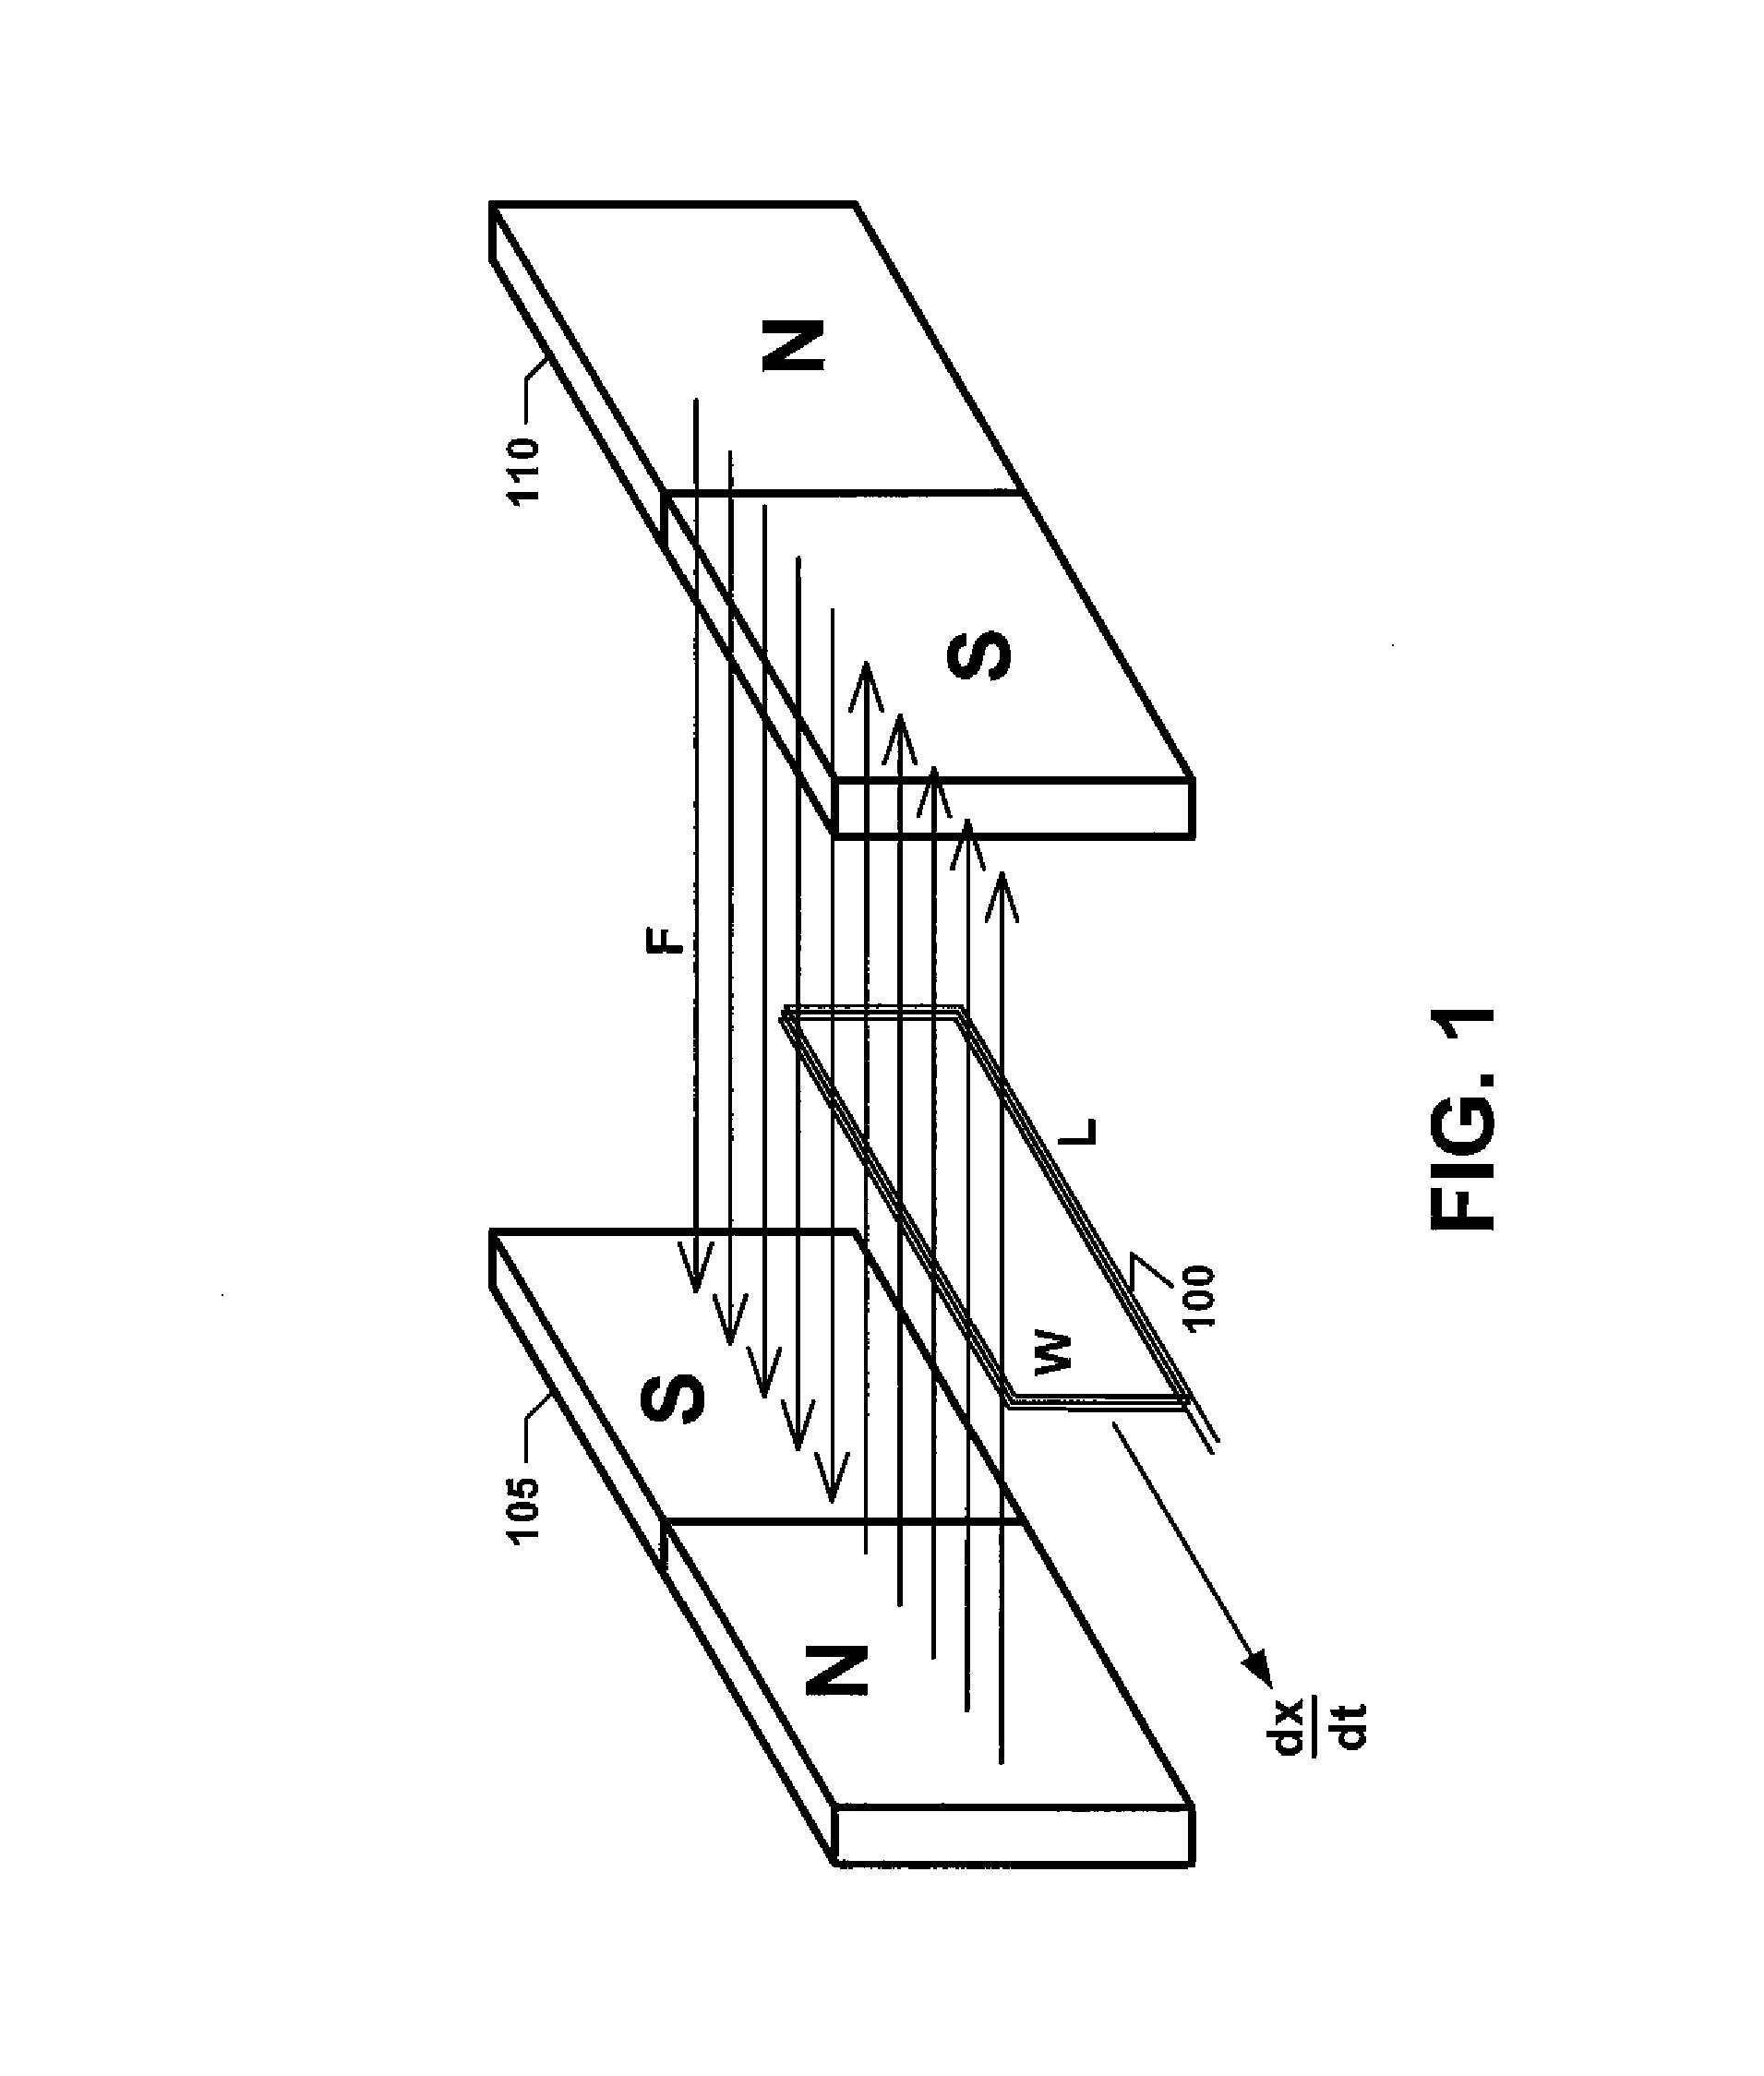 System and method for harvesting electrical energy by linear induction